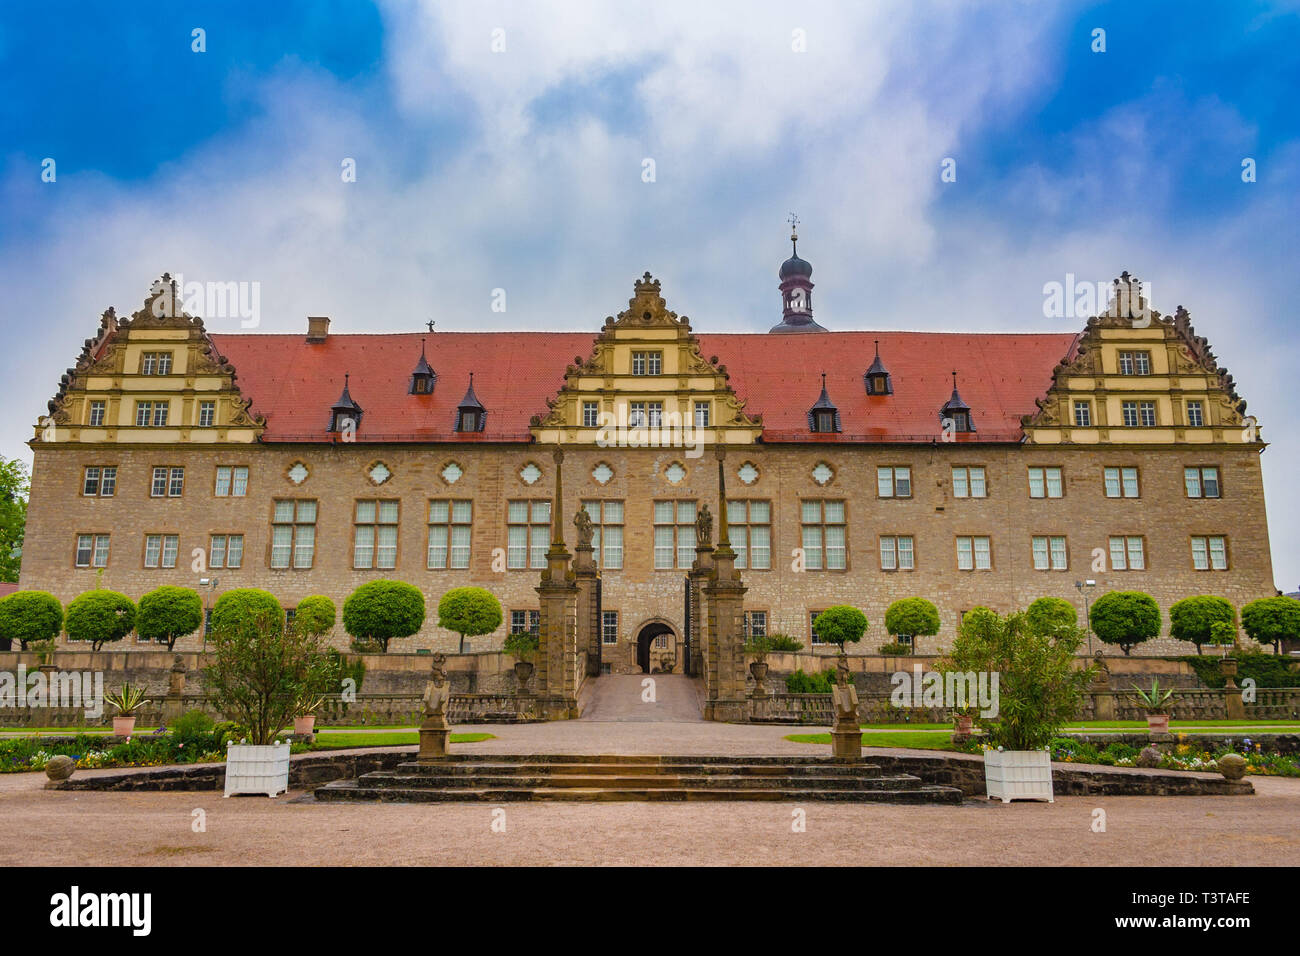 Lovely panoramic view of the Weikersheim Palace from the Baroque garden, the most beautiful palace in the Hohenlohe region in Baden-Württemberg,... Stock Photo